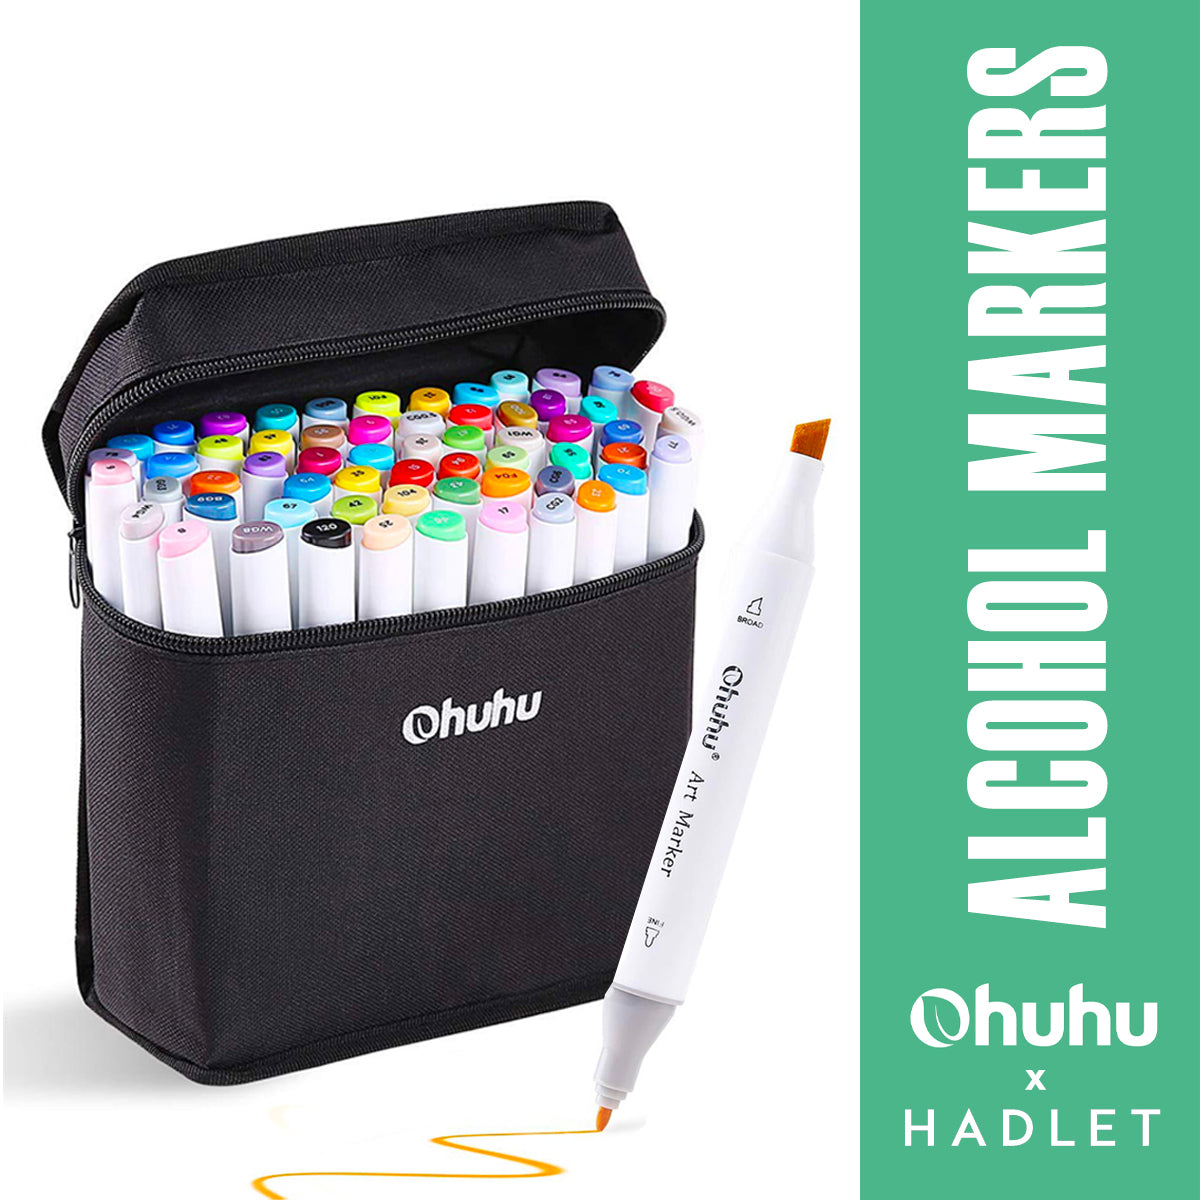 Which Ohuhu Alcohol Art Markers set do you prefer using for your artwo